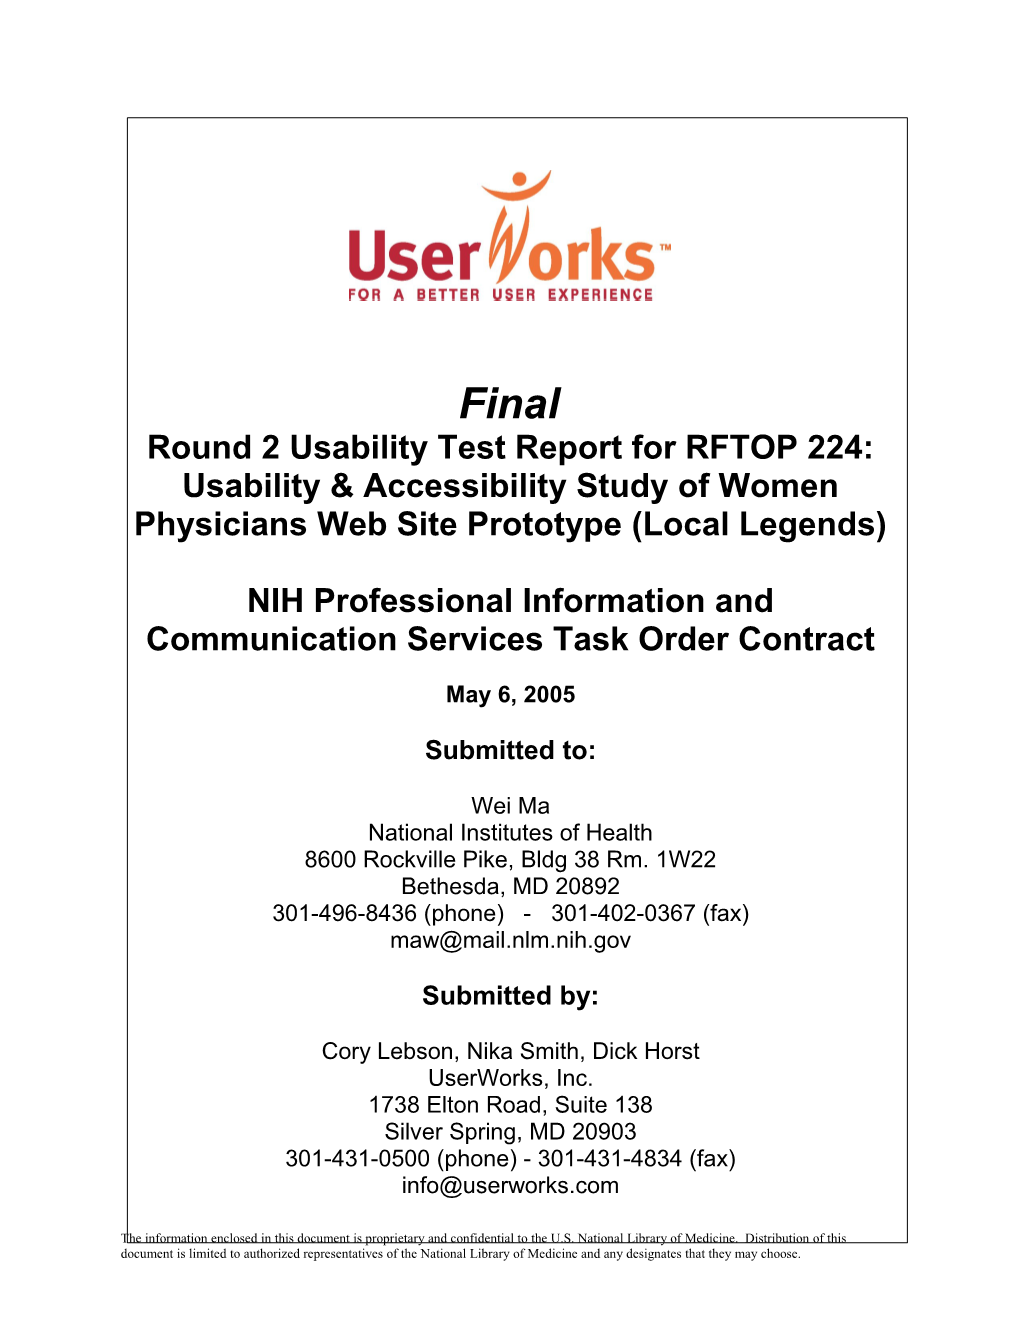 Round 2 Usability Test Report for RFTOP 224